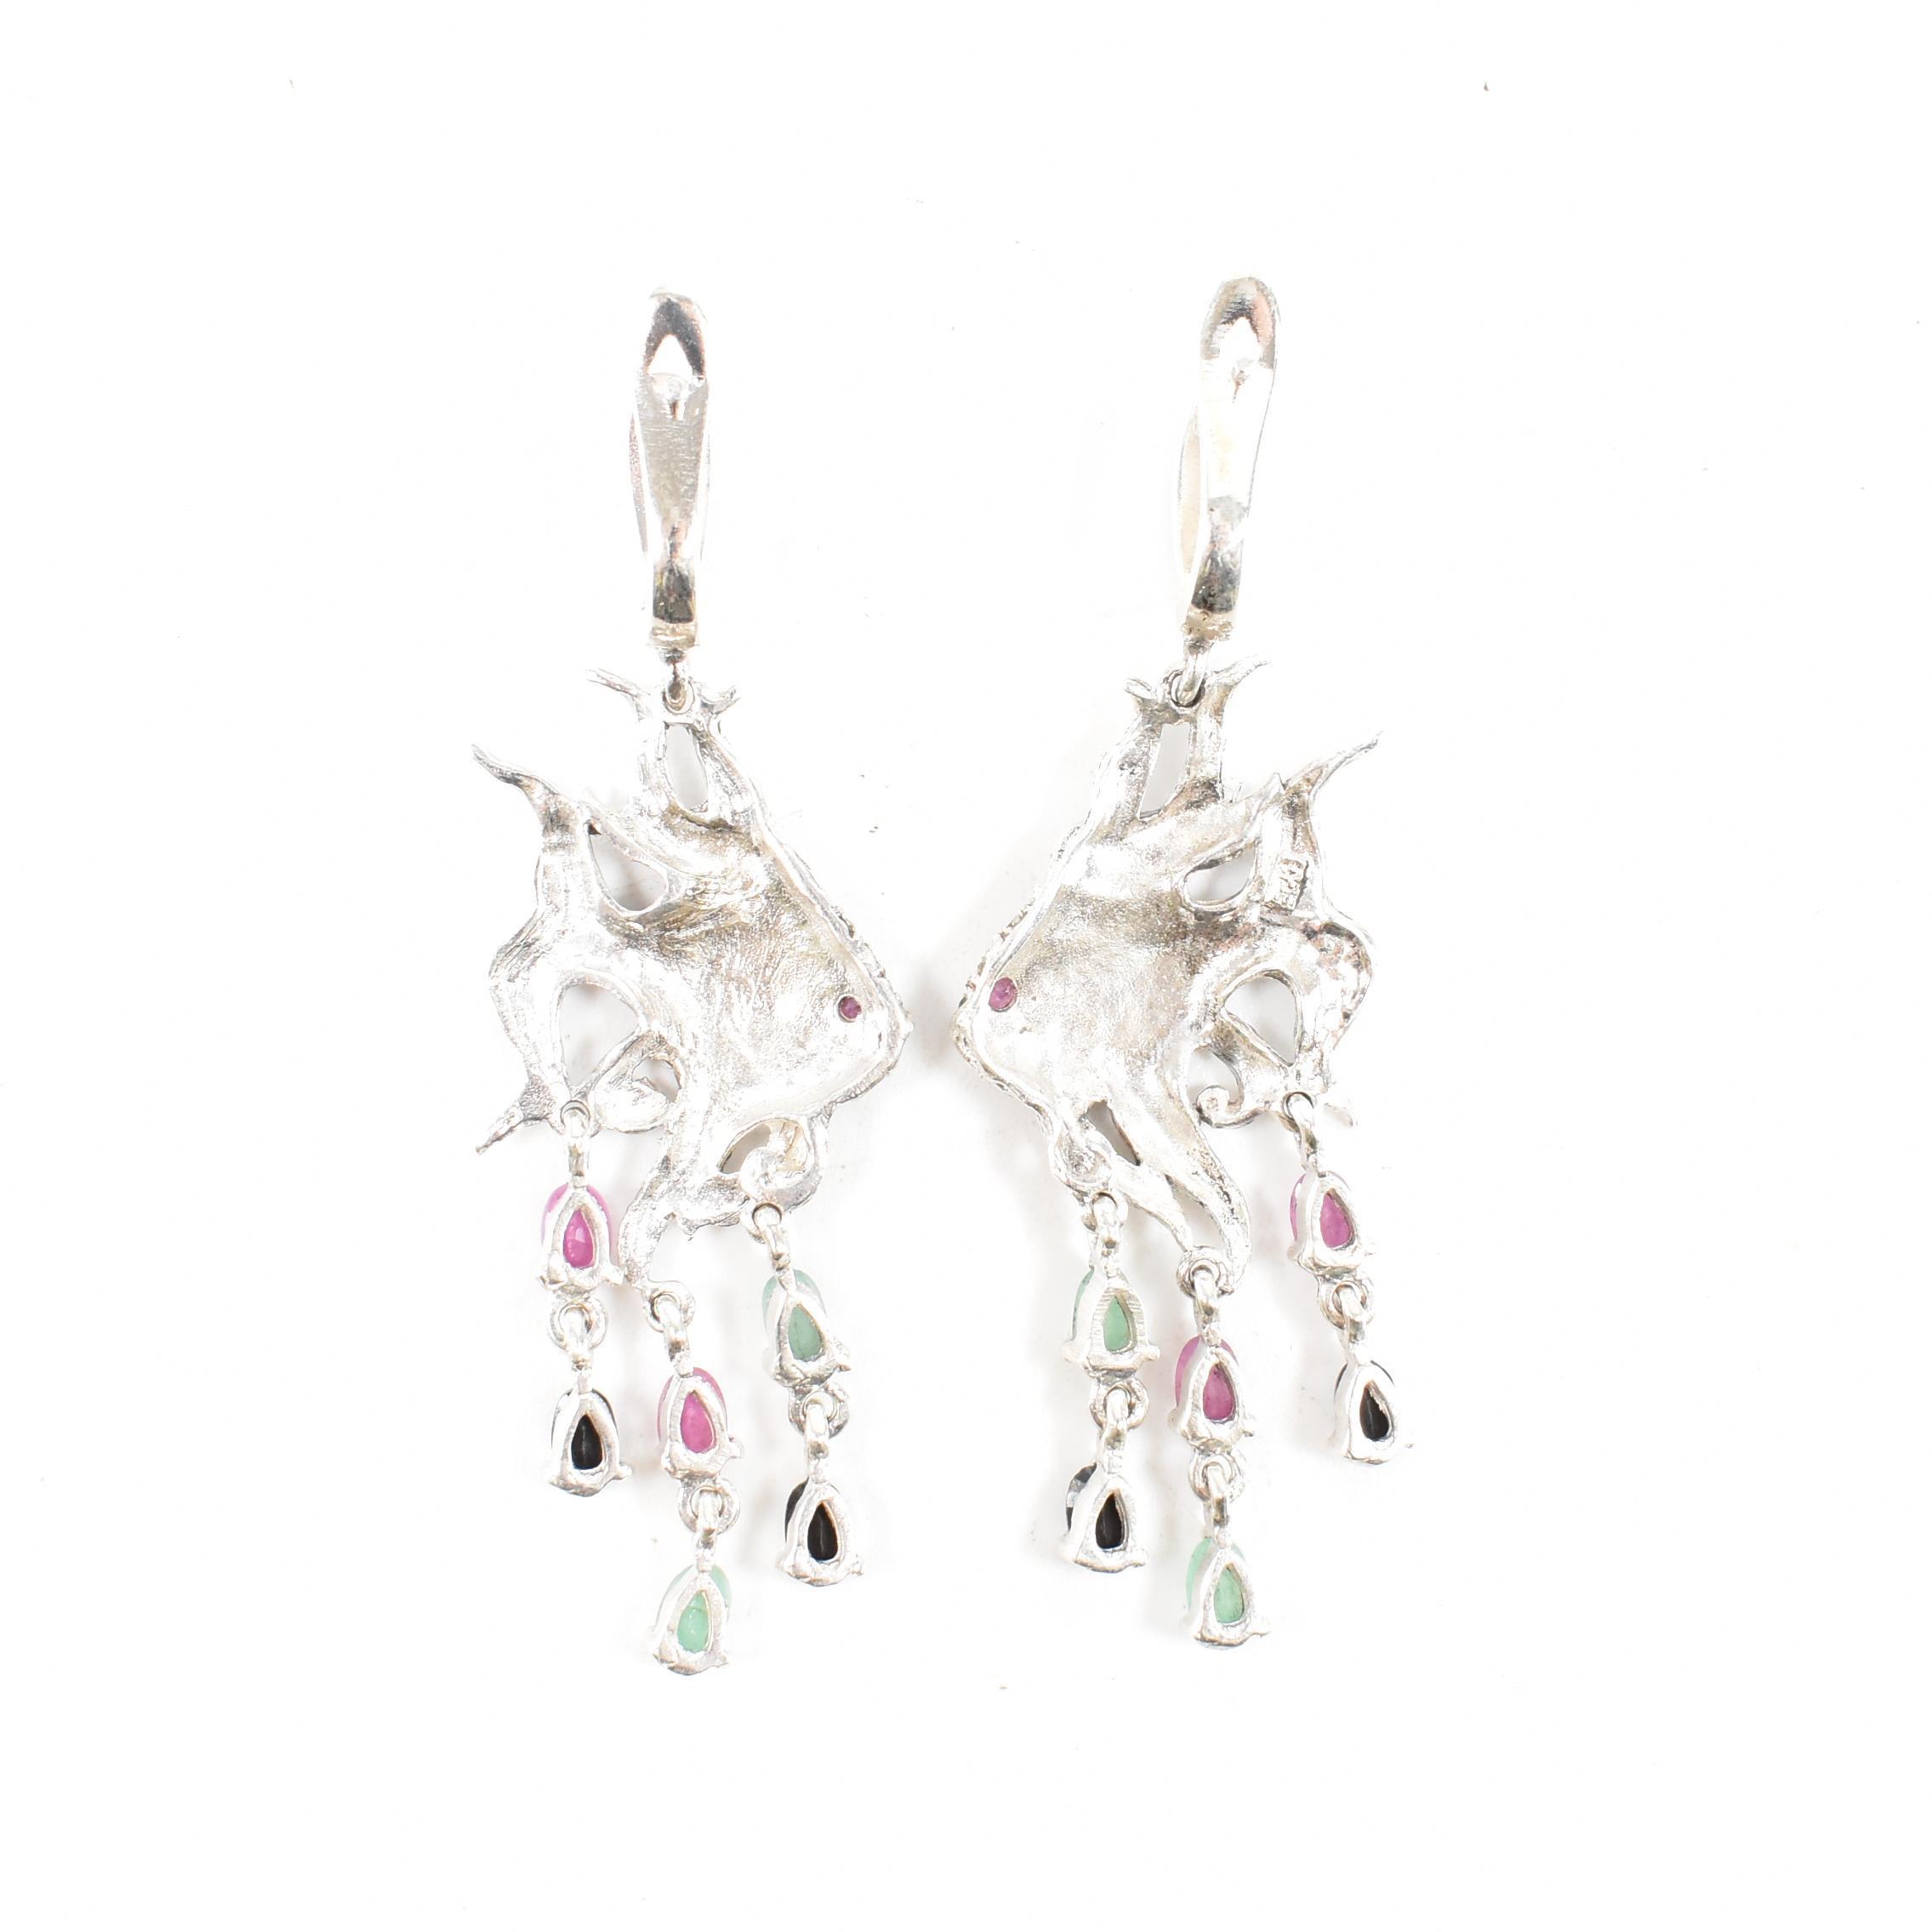 PAIR OF 925 SILVER MARCASITE RUBY EMERALD & SAPPHIRE DROP EARRINGS - Image 2 of 3